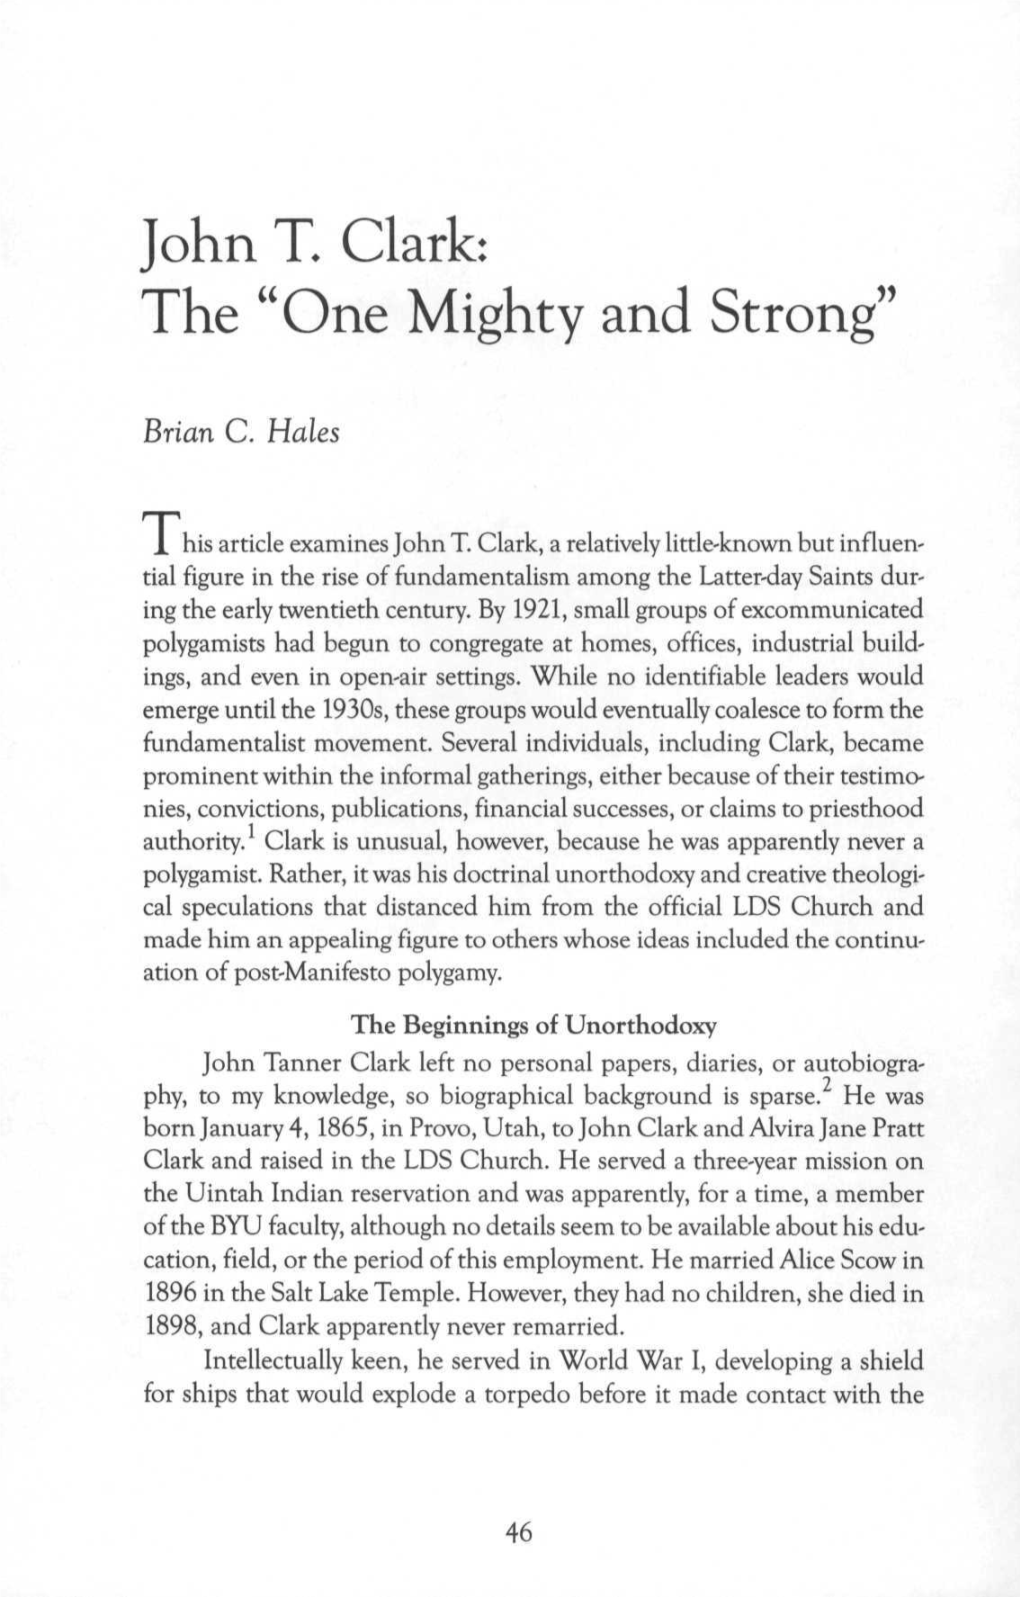 John T. Clark: the "One Mighty and Strong"